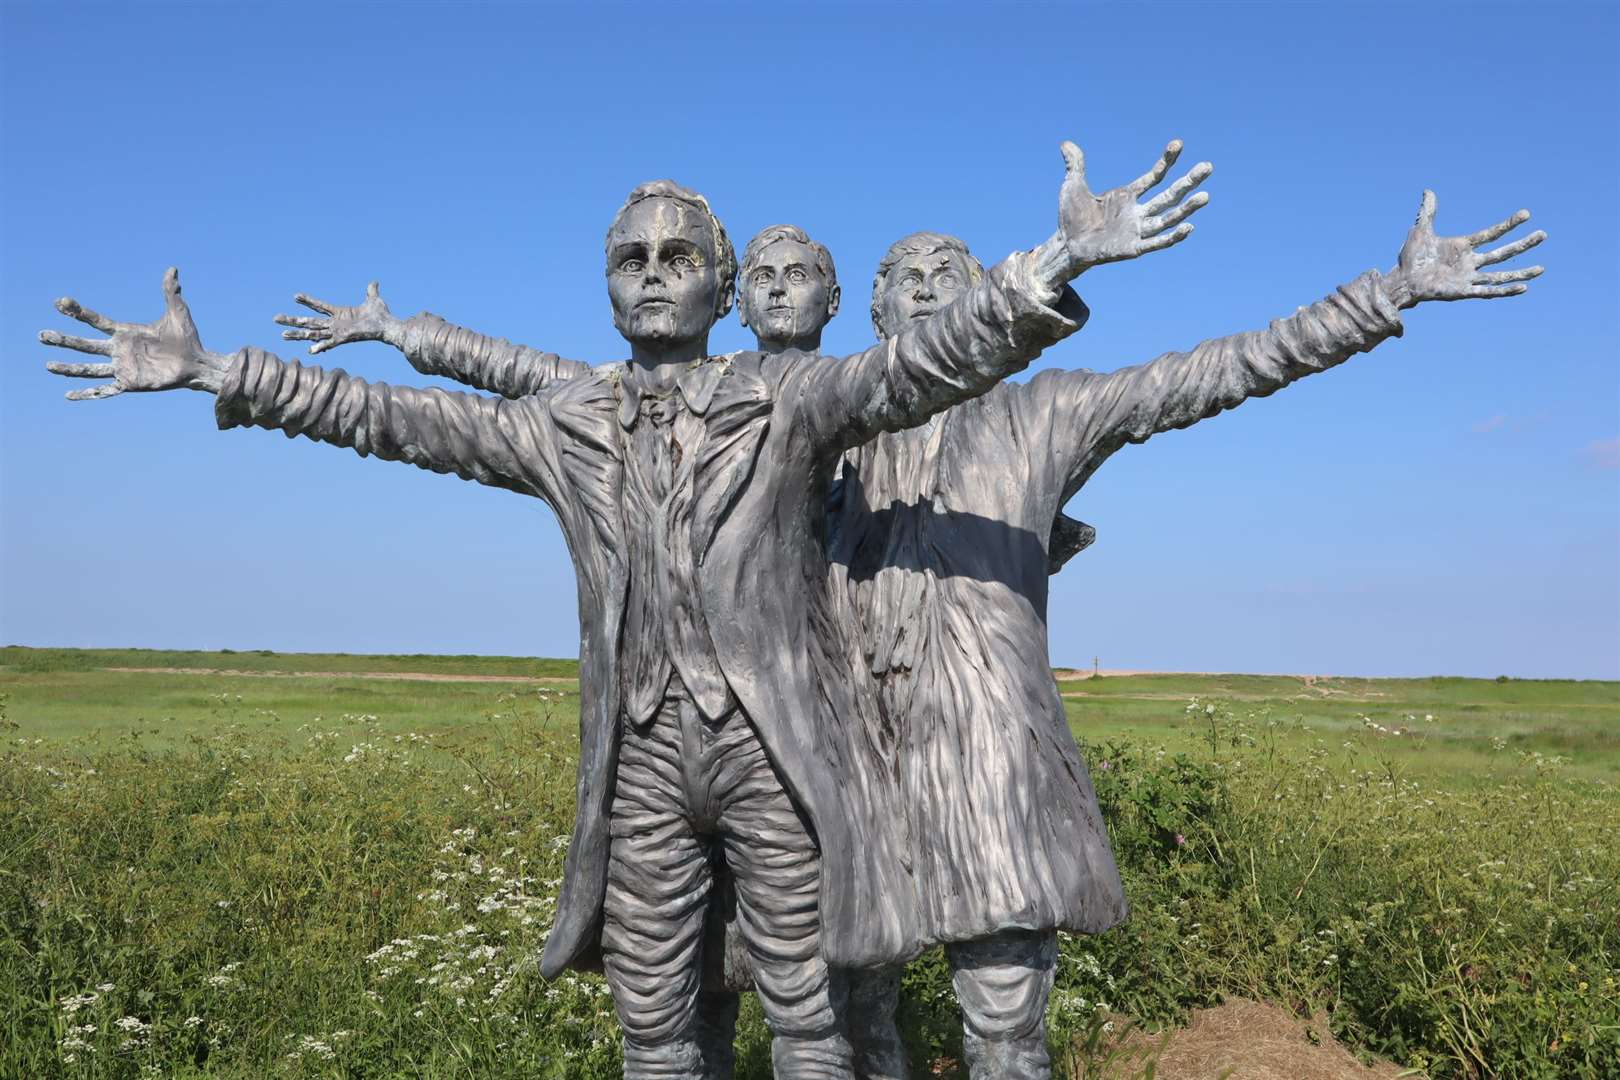 Statue to British aviation pioneers the Short Brothers Oswald, Eustace and Horace who set up the first aircraft factory on the Isle of Sheppey. The statue at Shellness by Muswell Manor is dedicated to the "magnificent makers of flying machines."